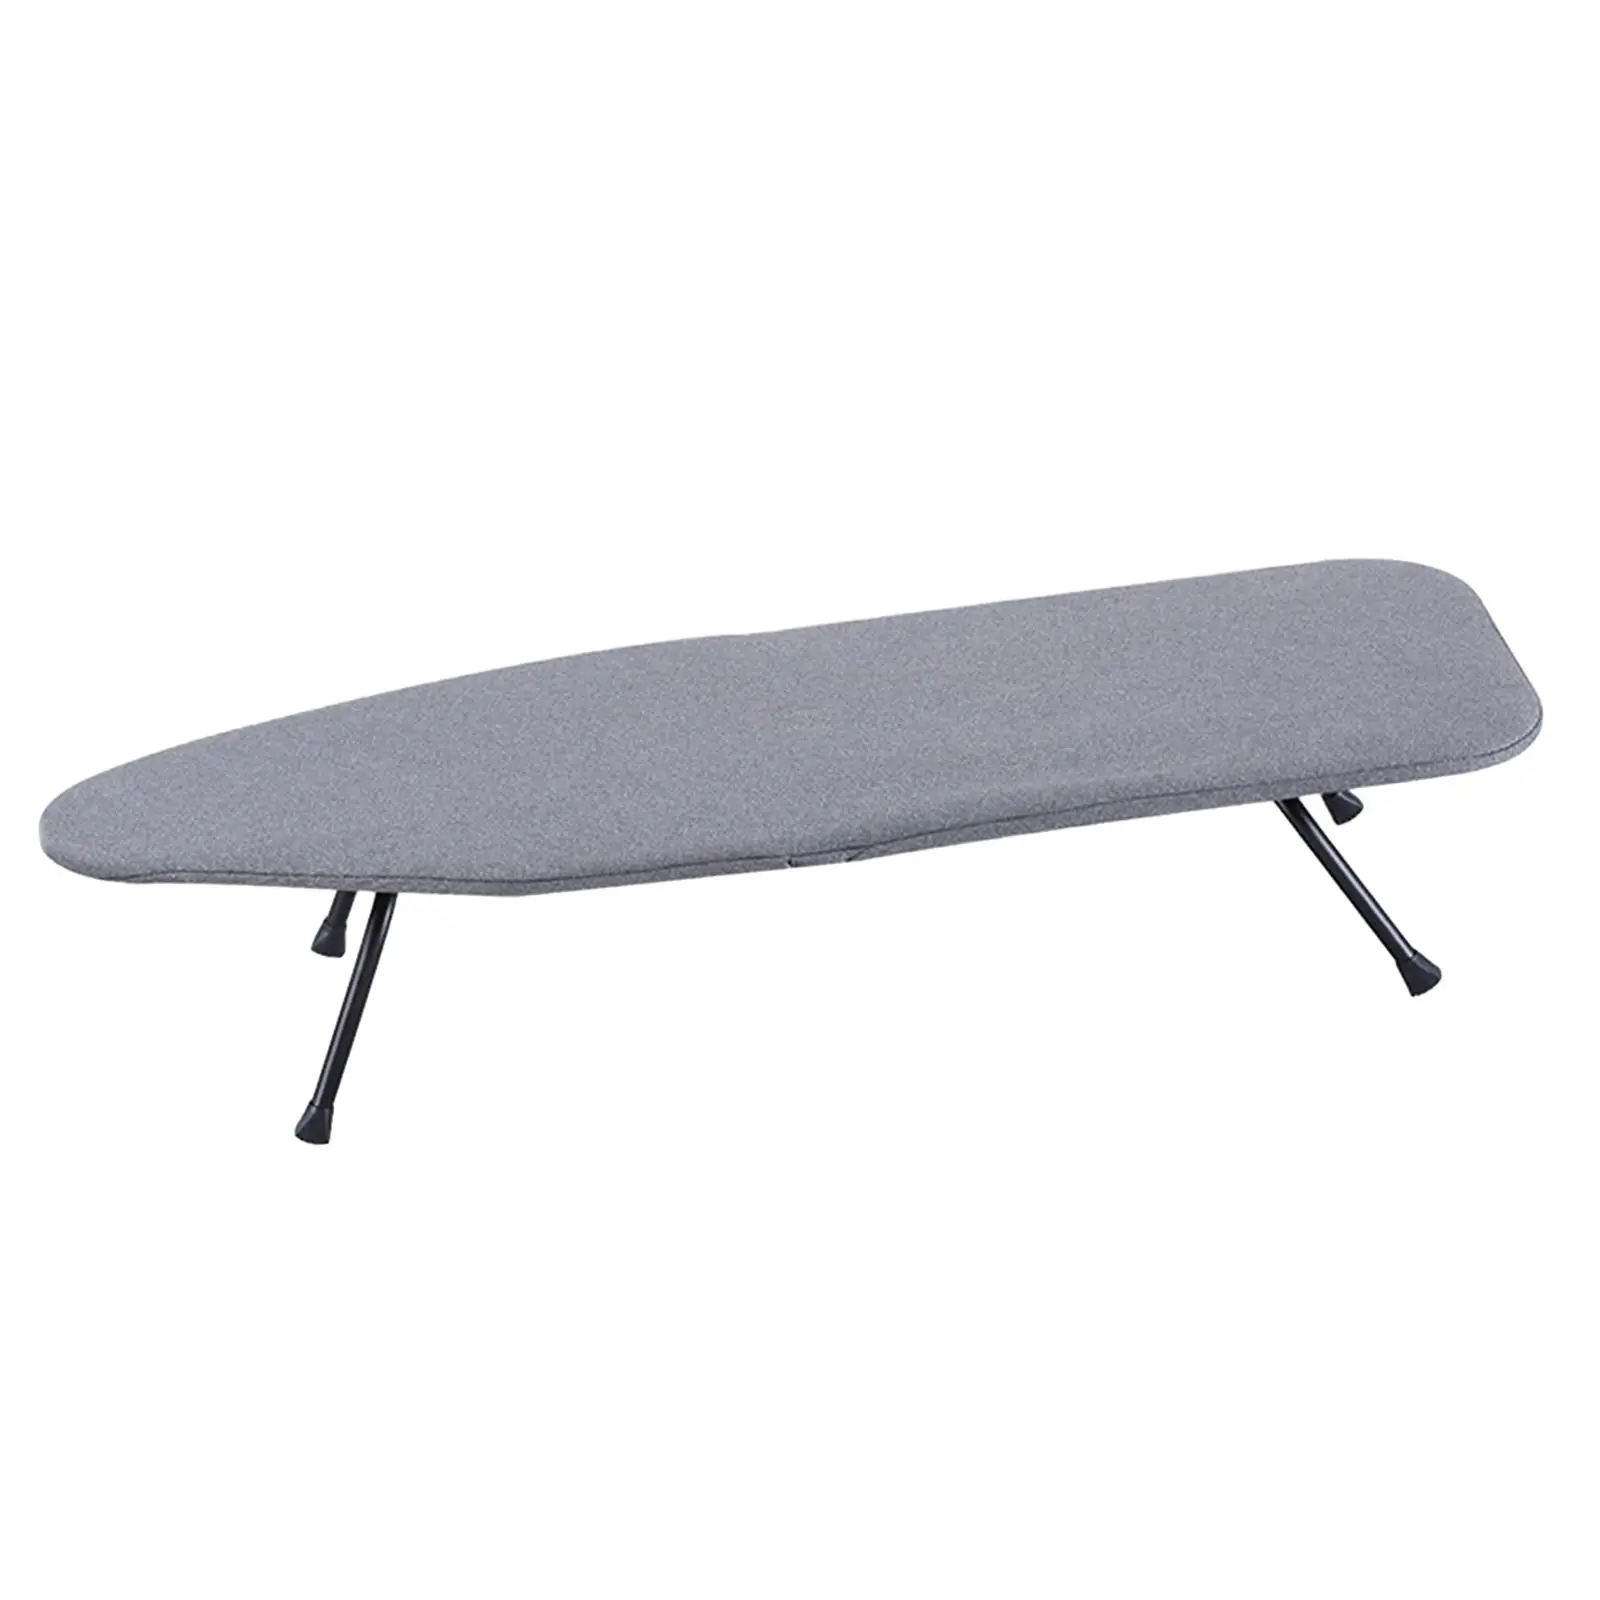 

Tabletop Ironing Board Compact Countertop Ironing Board Space Saving Small Iron Board for Travel Sewing Dorm Craft Room Home